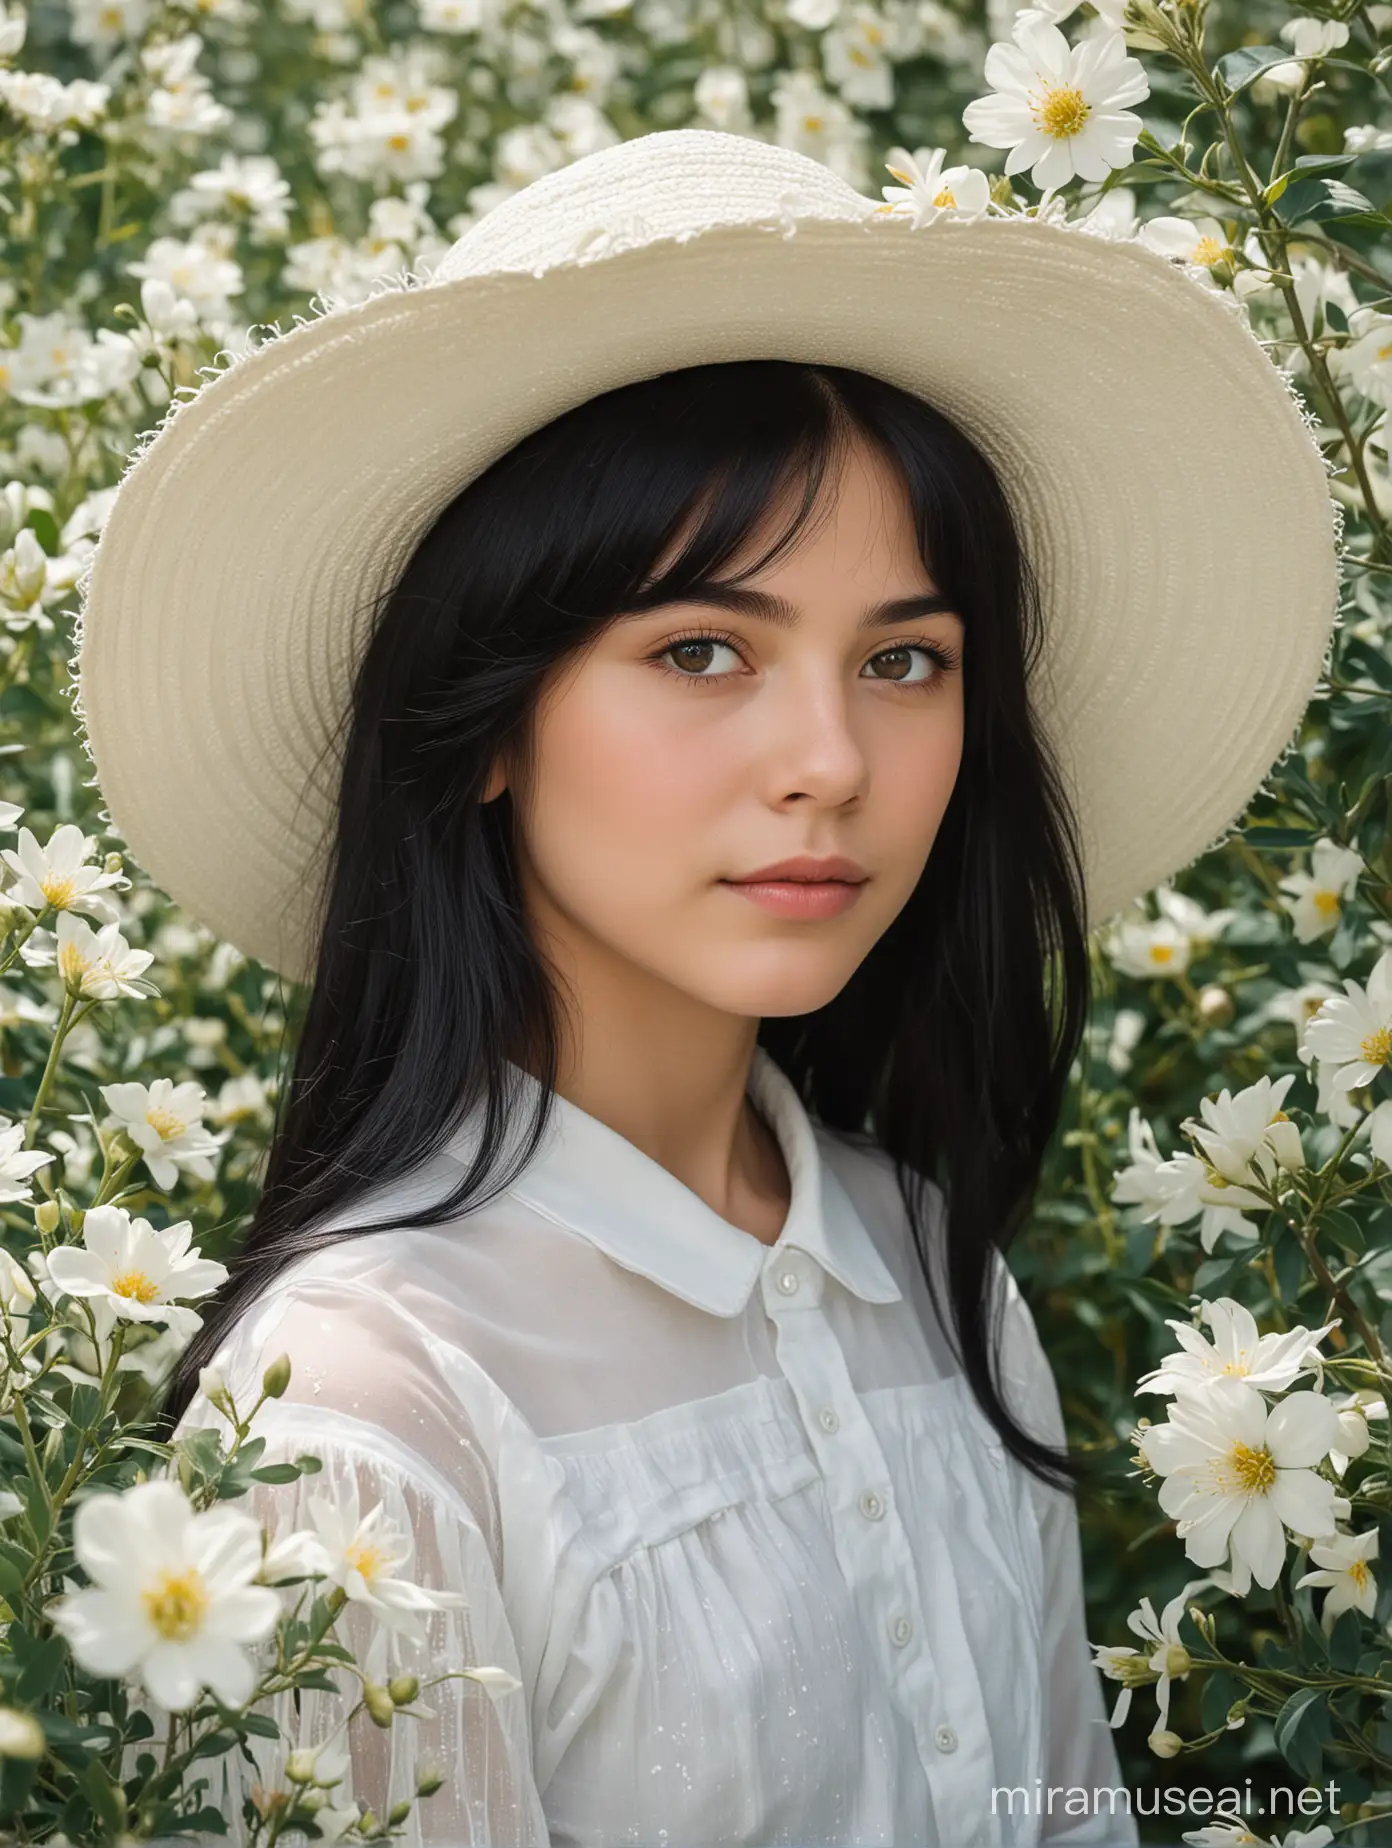 Portrait of a young girl with black hair and a white hat among white flowers